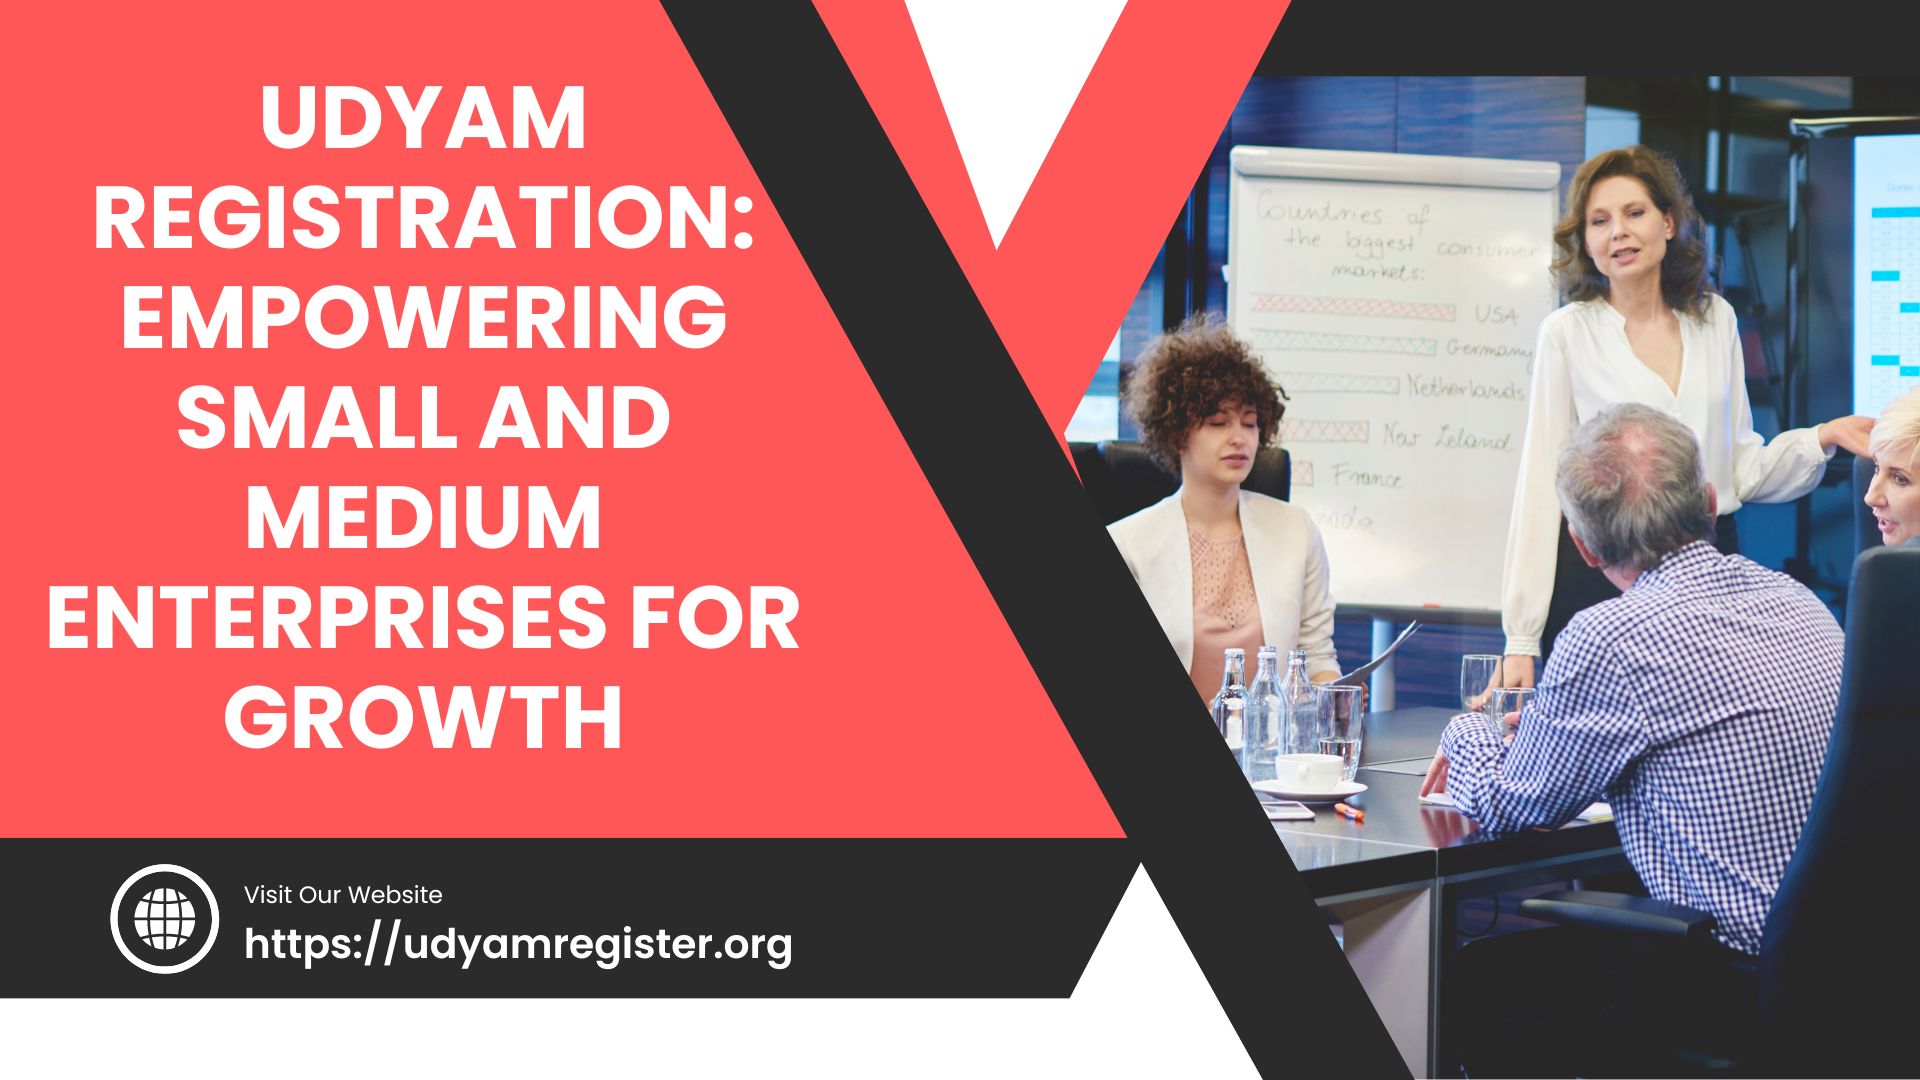 Udyam Registration Empowering Small and Medium Enterprises for Growth